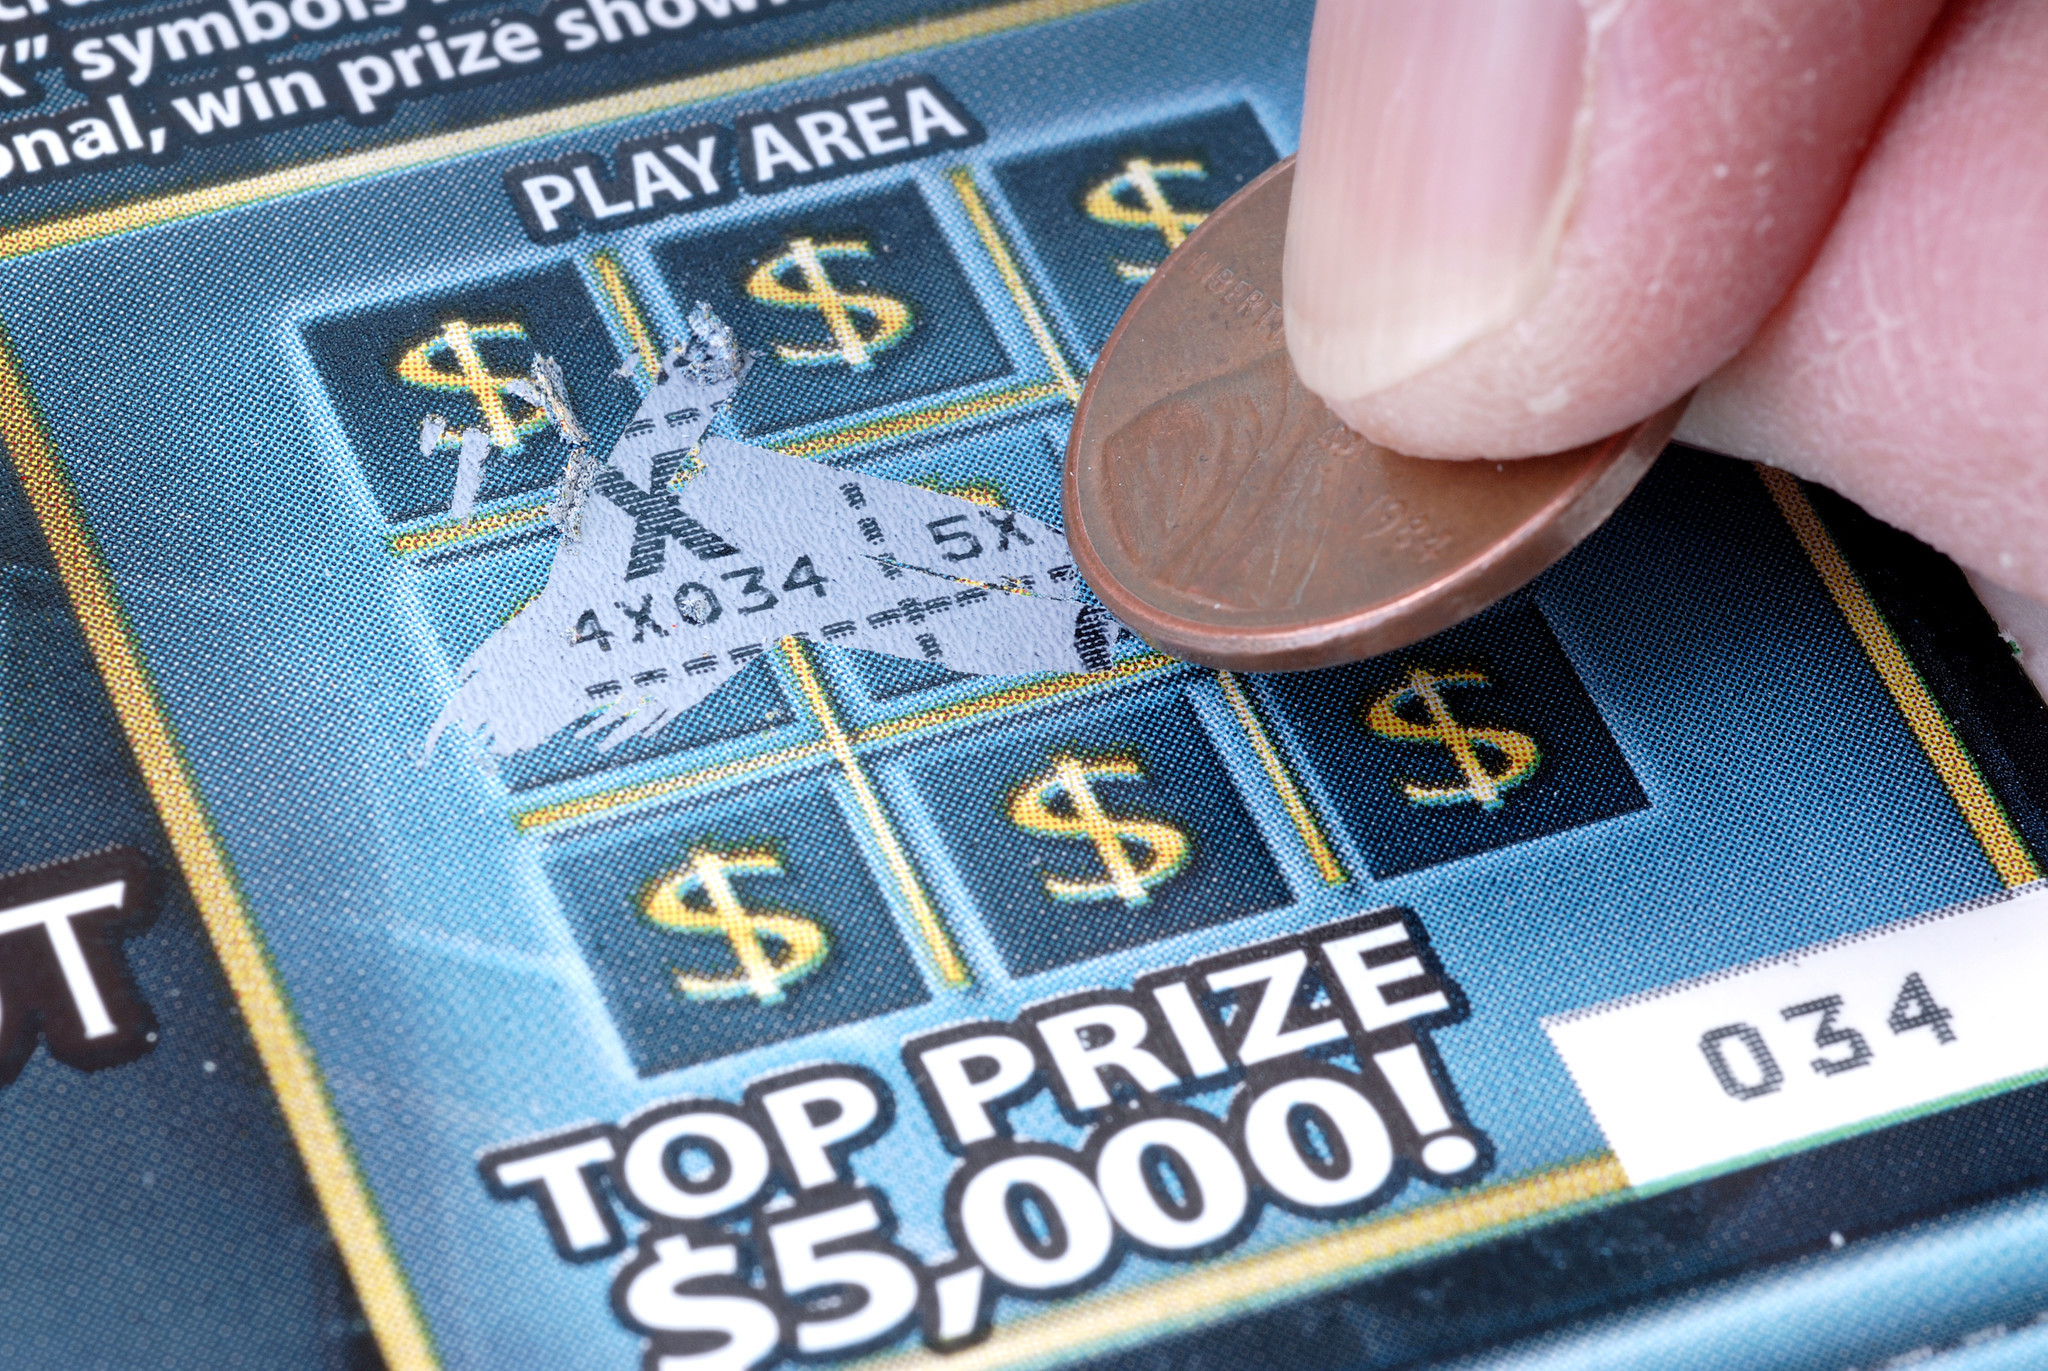 Was It Luck? 2 Winning Lottery Tickets Bring Lawsuit, Police Probe - Hartford Courant